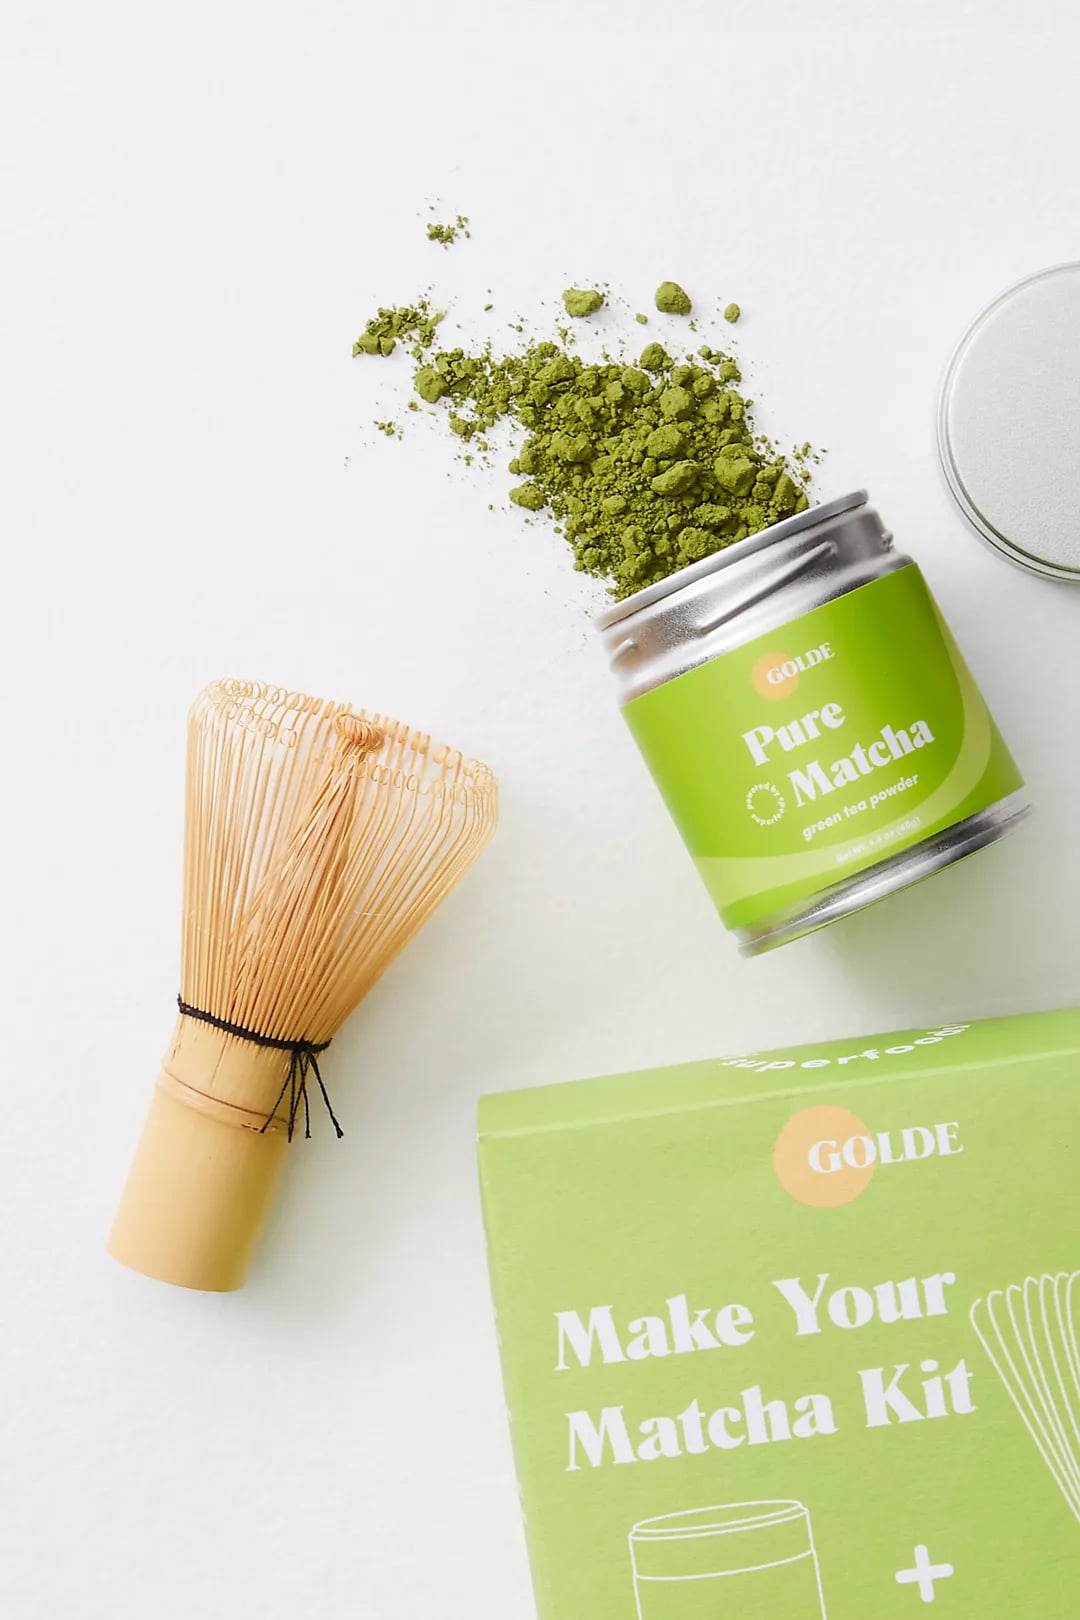 The Ultimate Gift Guide for Coffee, Tea & Matcha Lovers